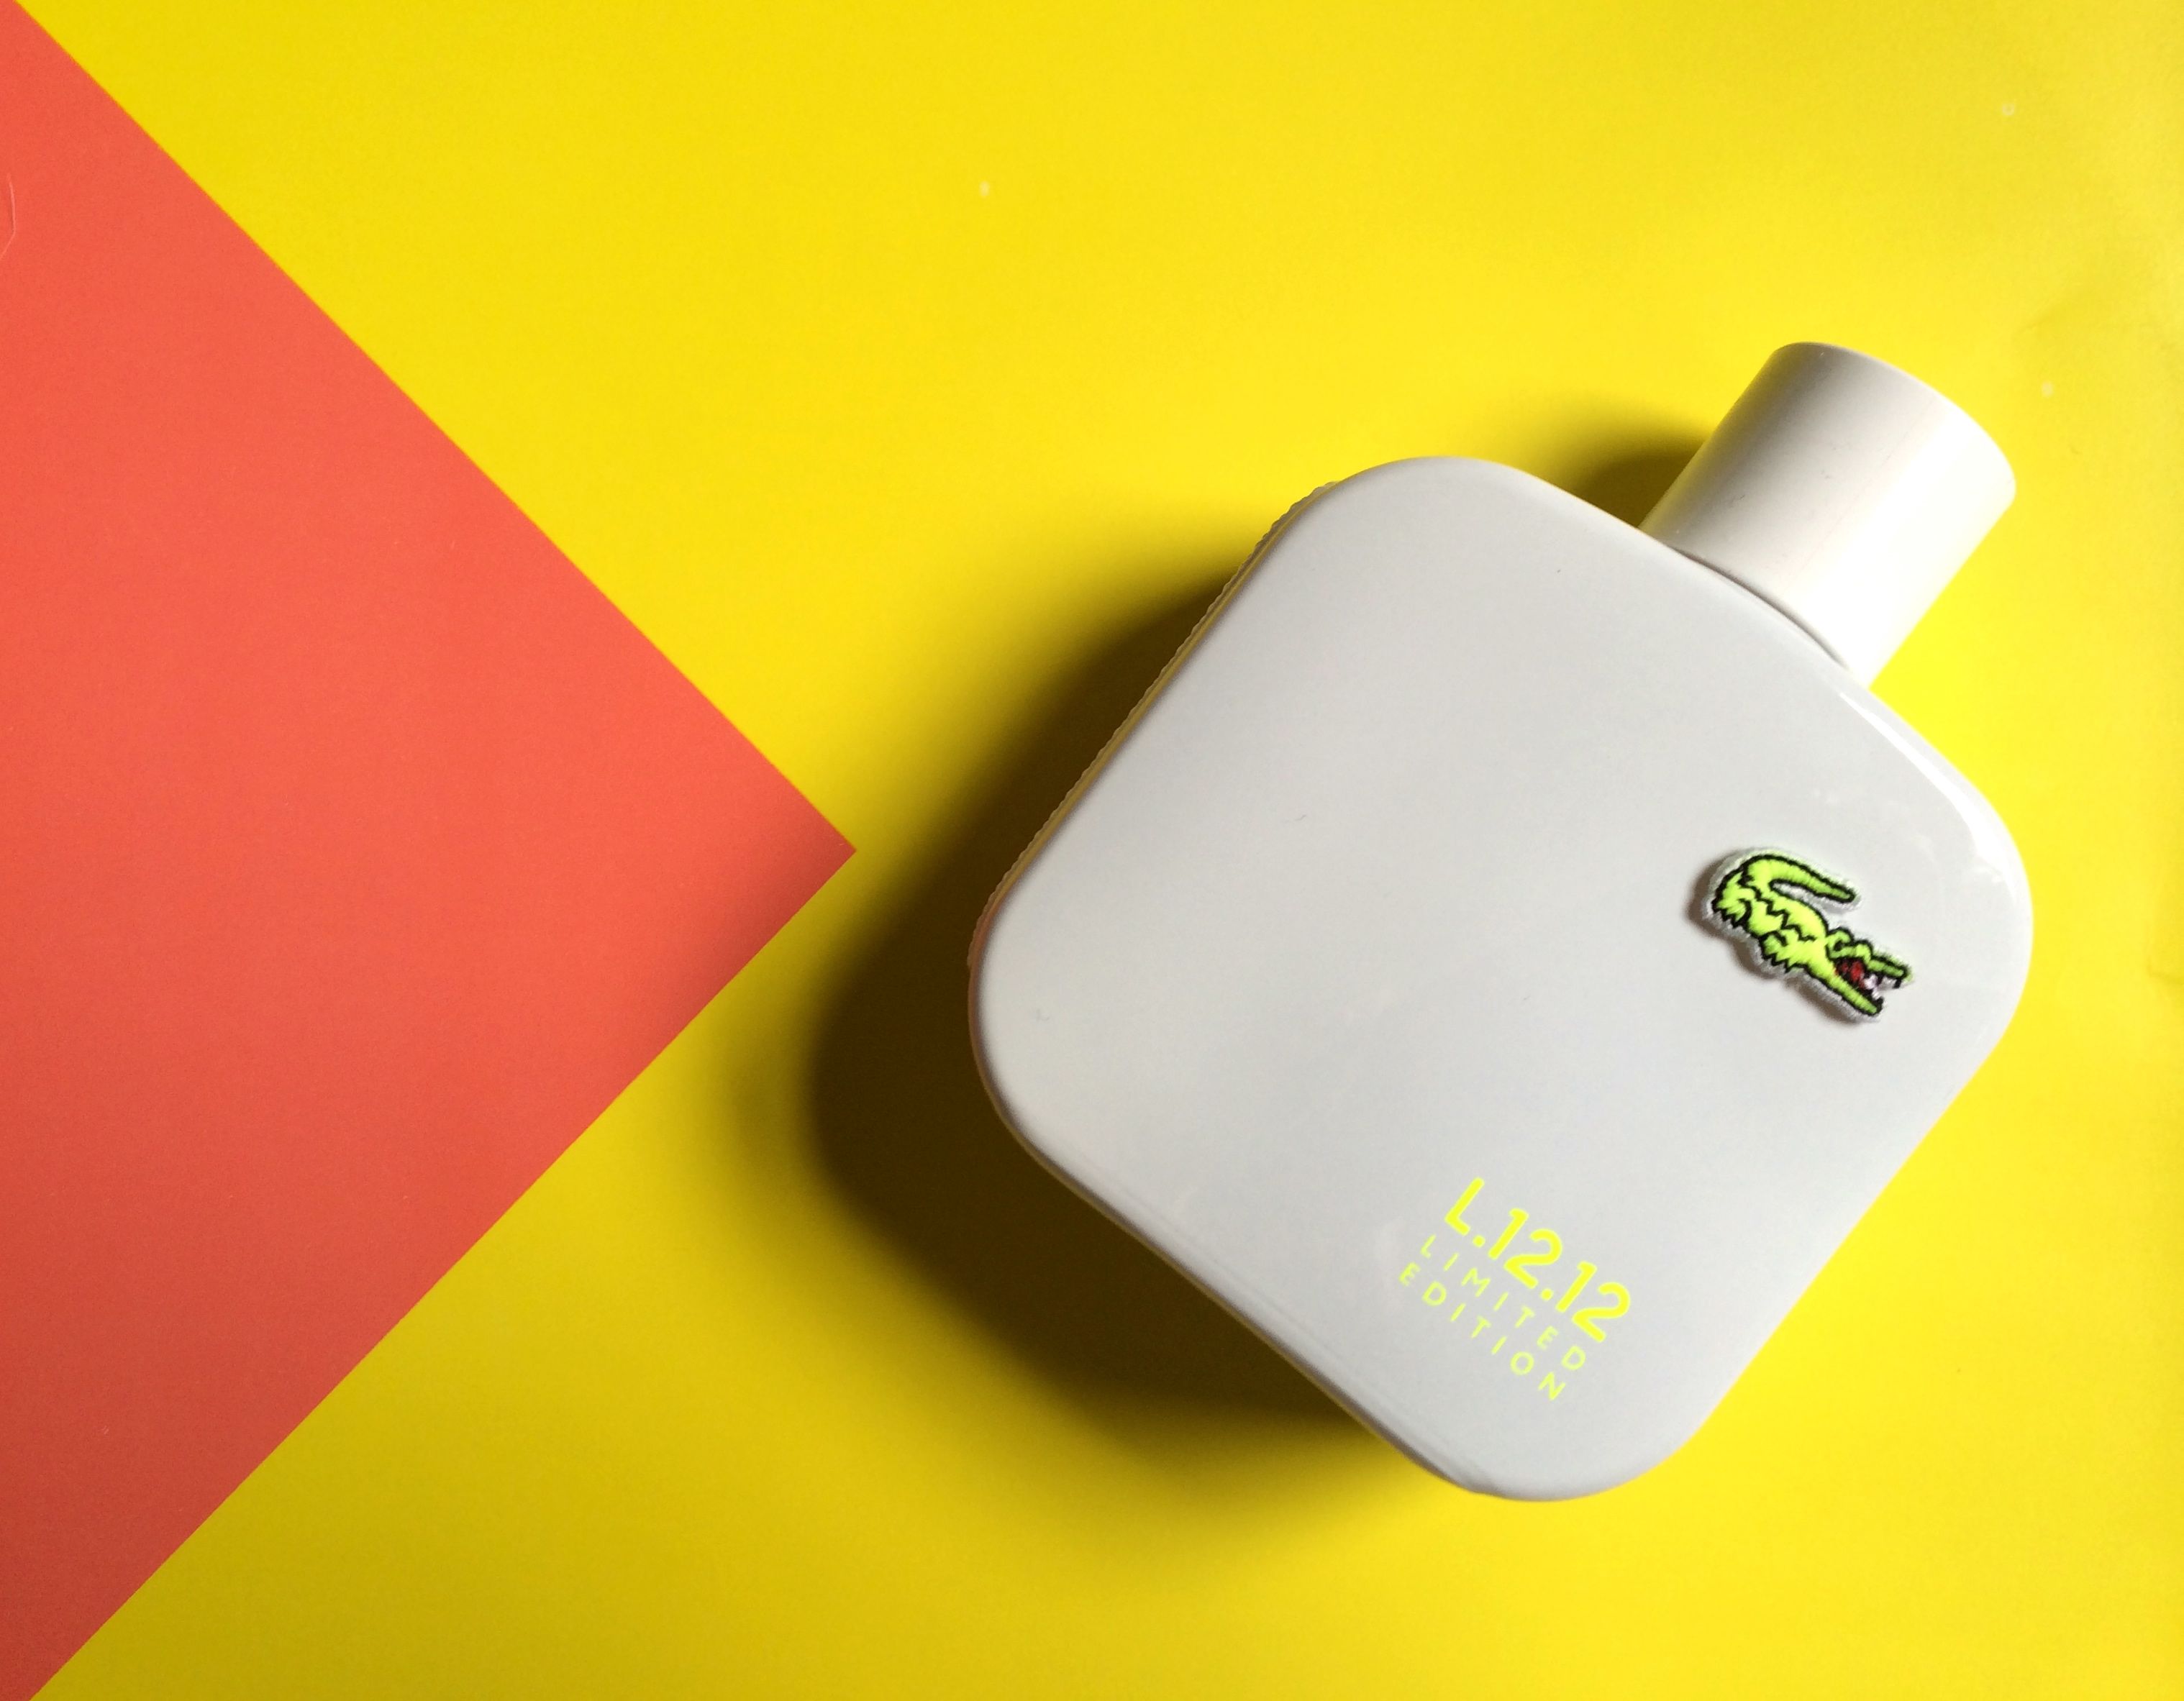 Lacoste's Limited L.12.12. fragrance hits the spot – The